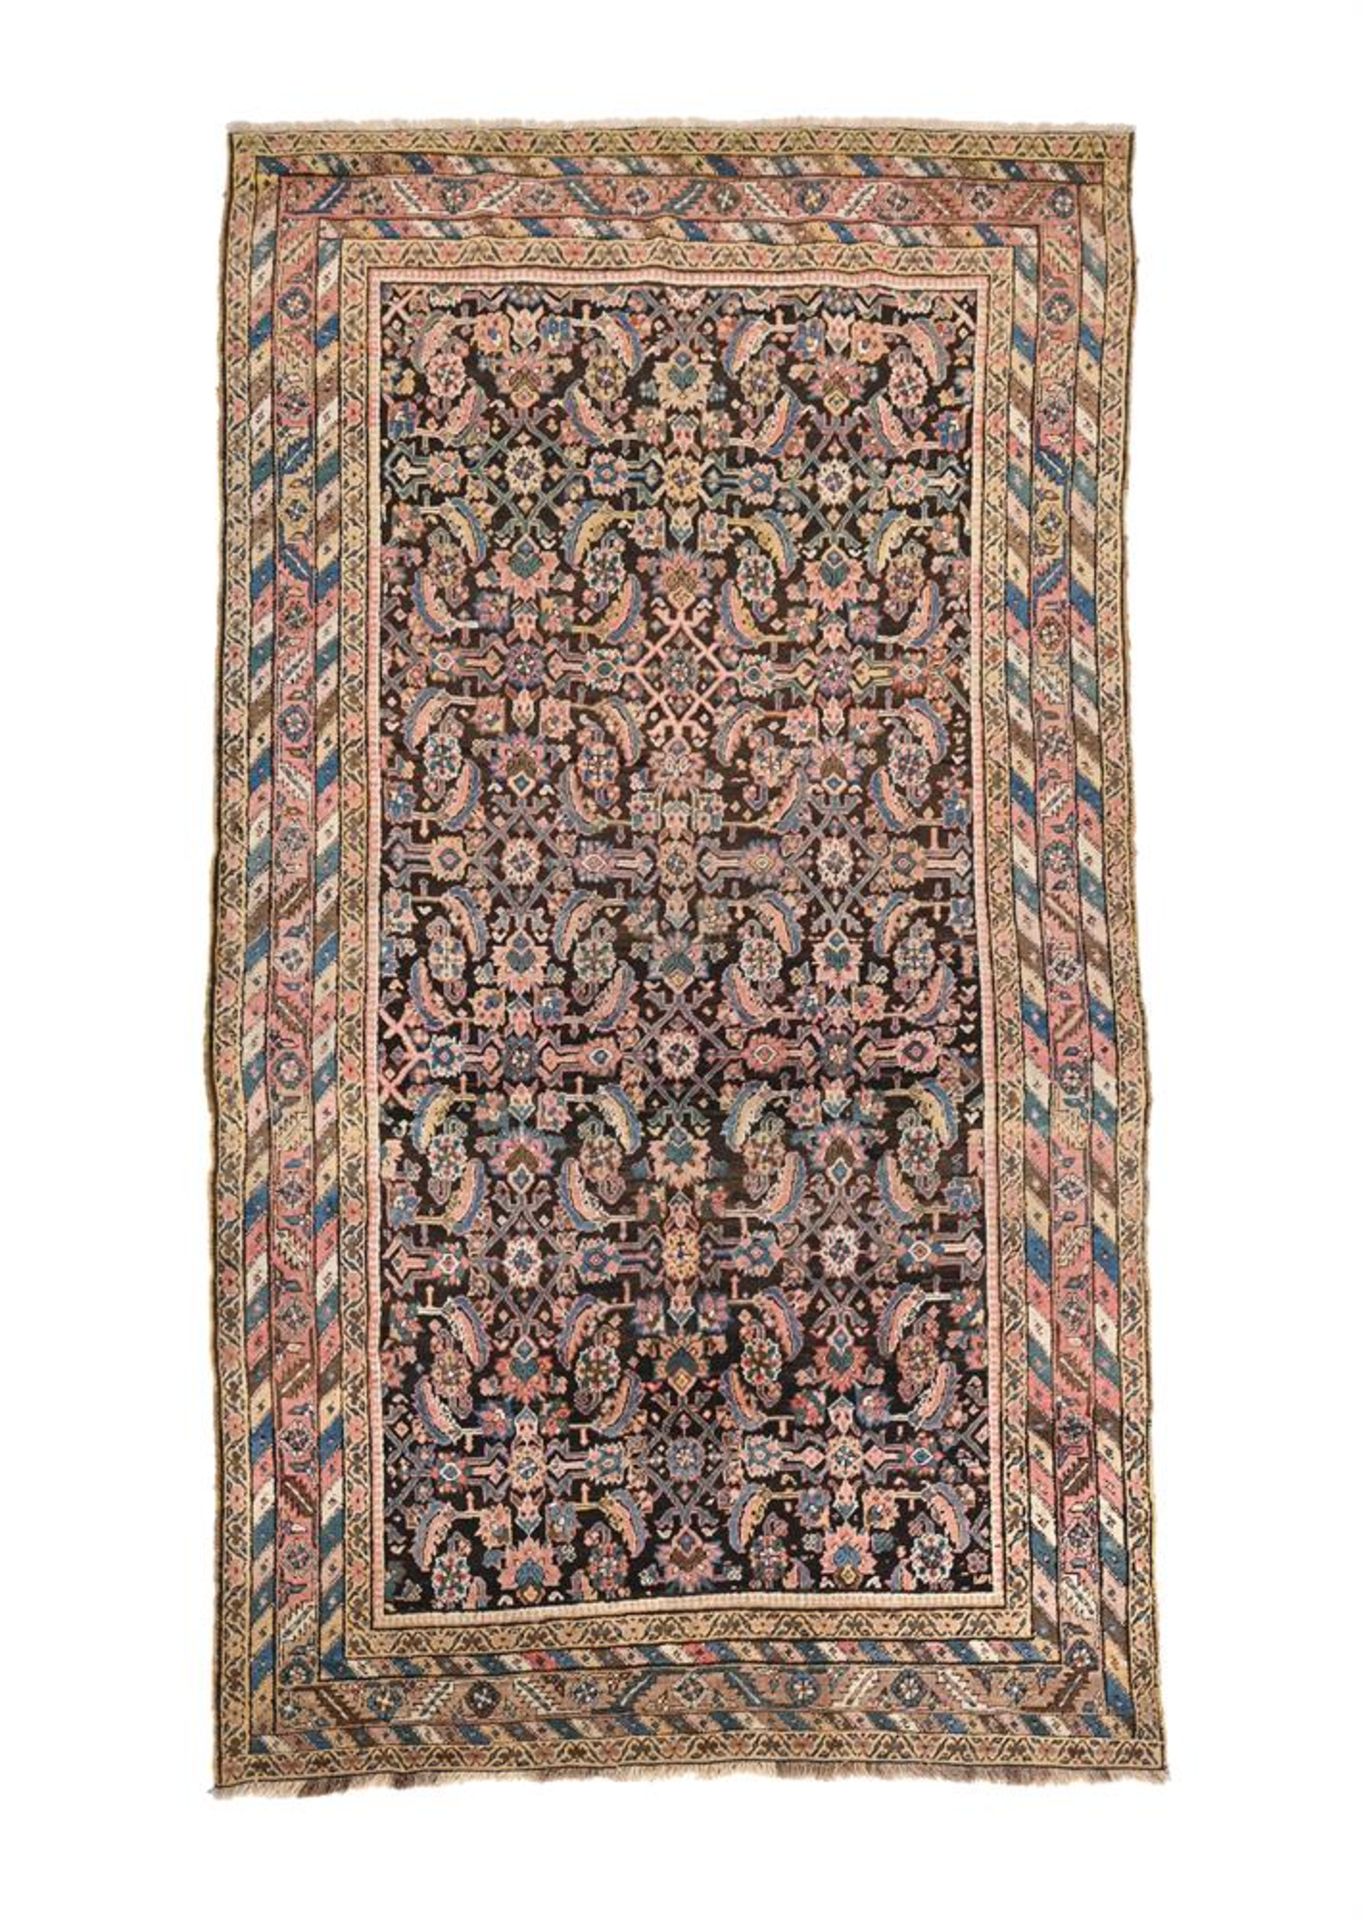 A KARABAGH GALLERY CARPET, approximately 284 x 150cm